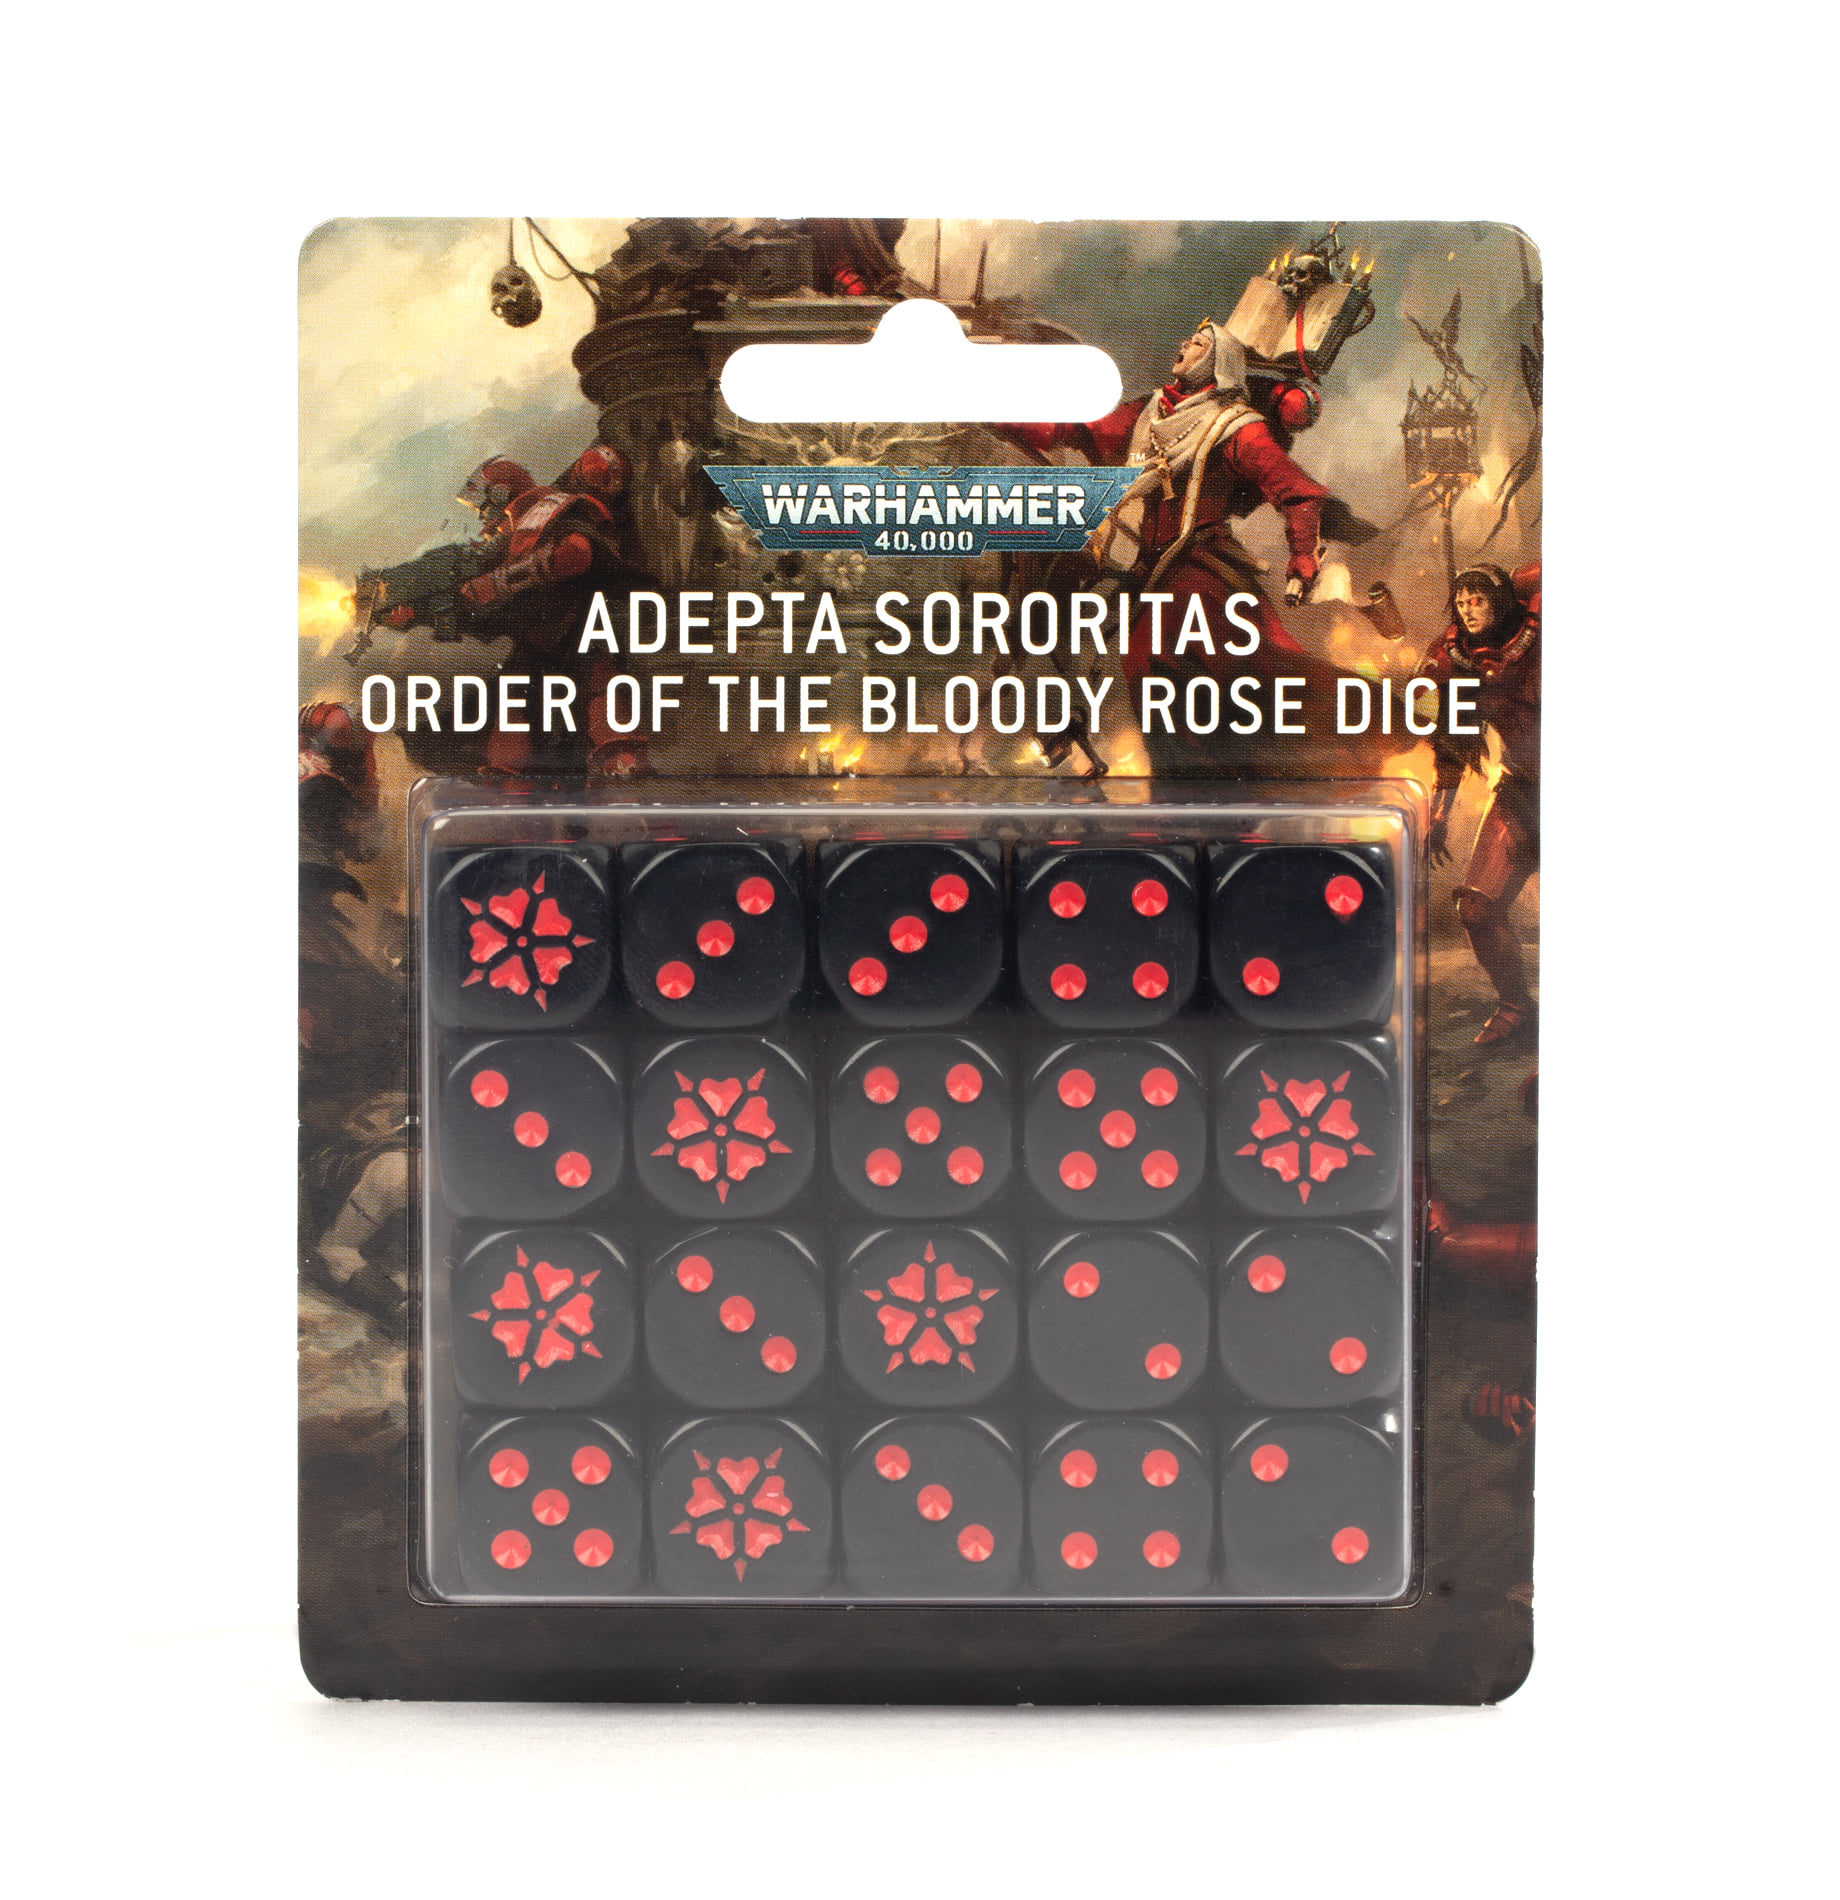 A/S: ORDER OF THE BLOODY ROSE DICE